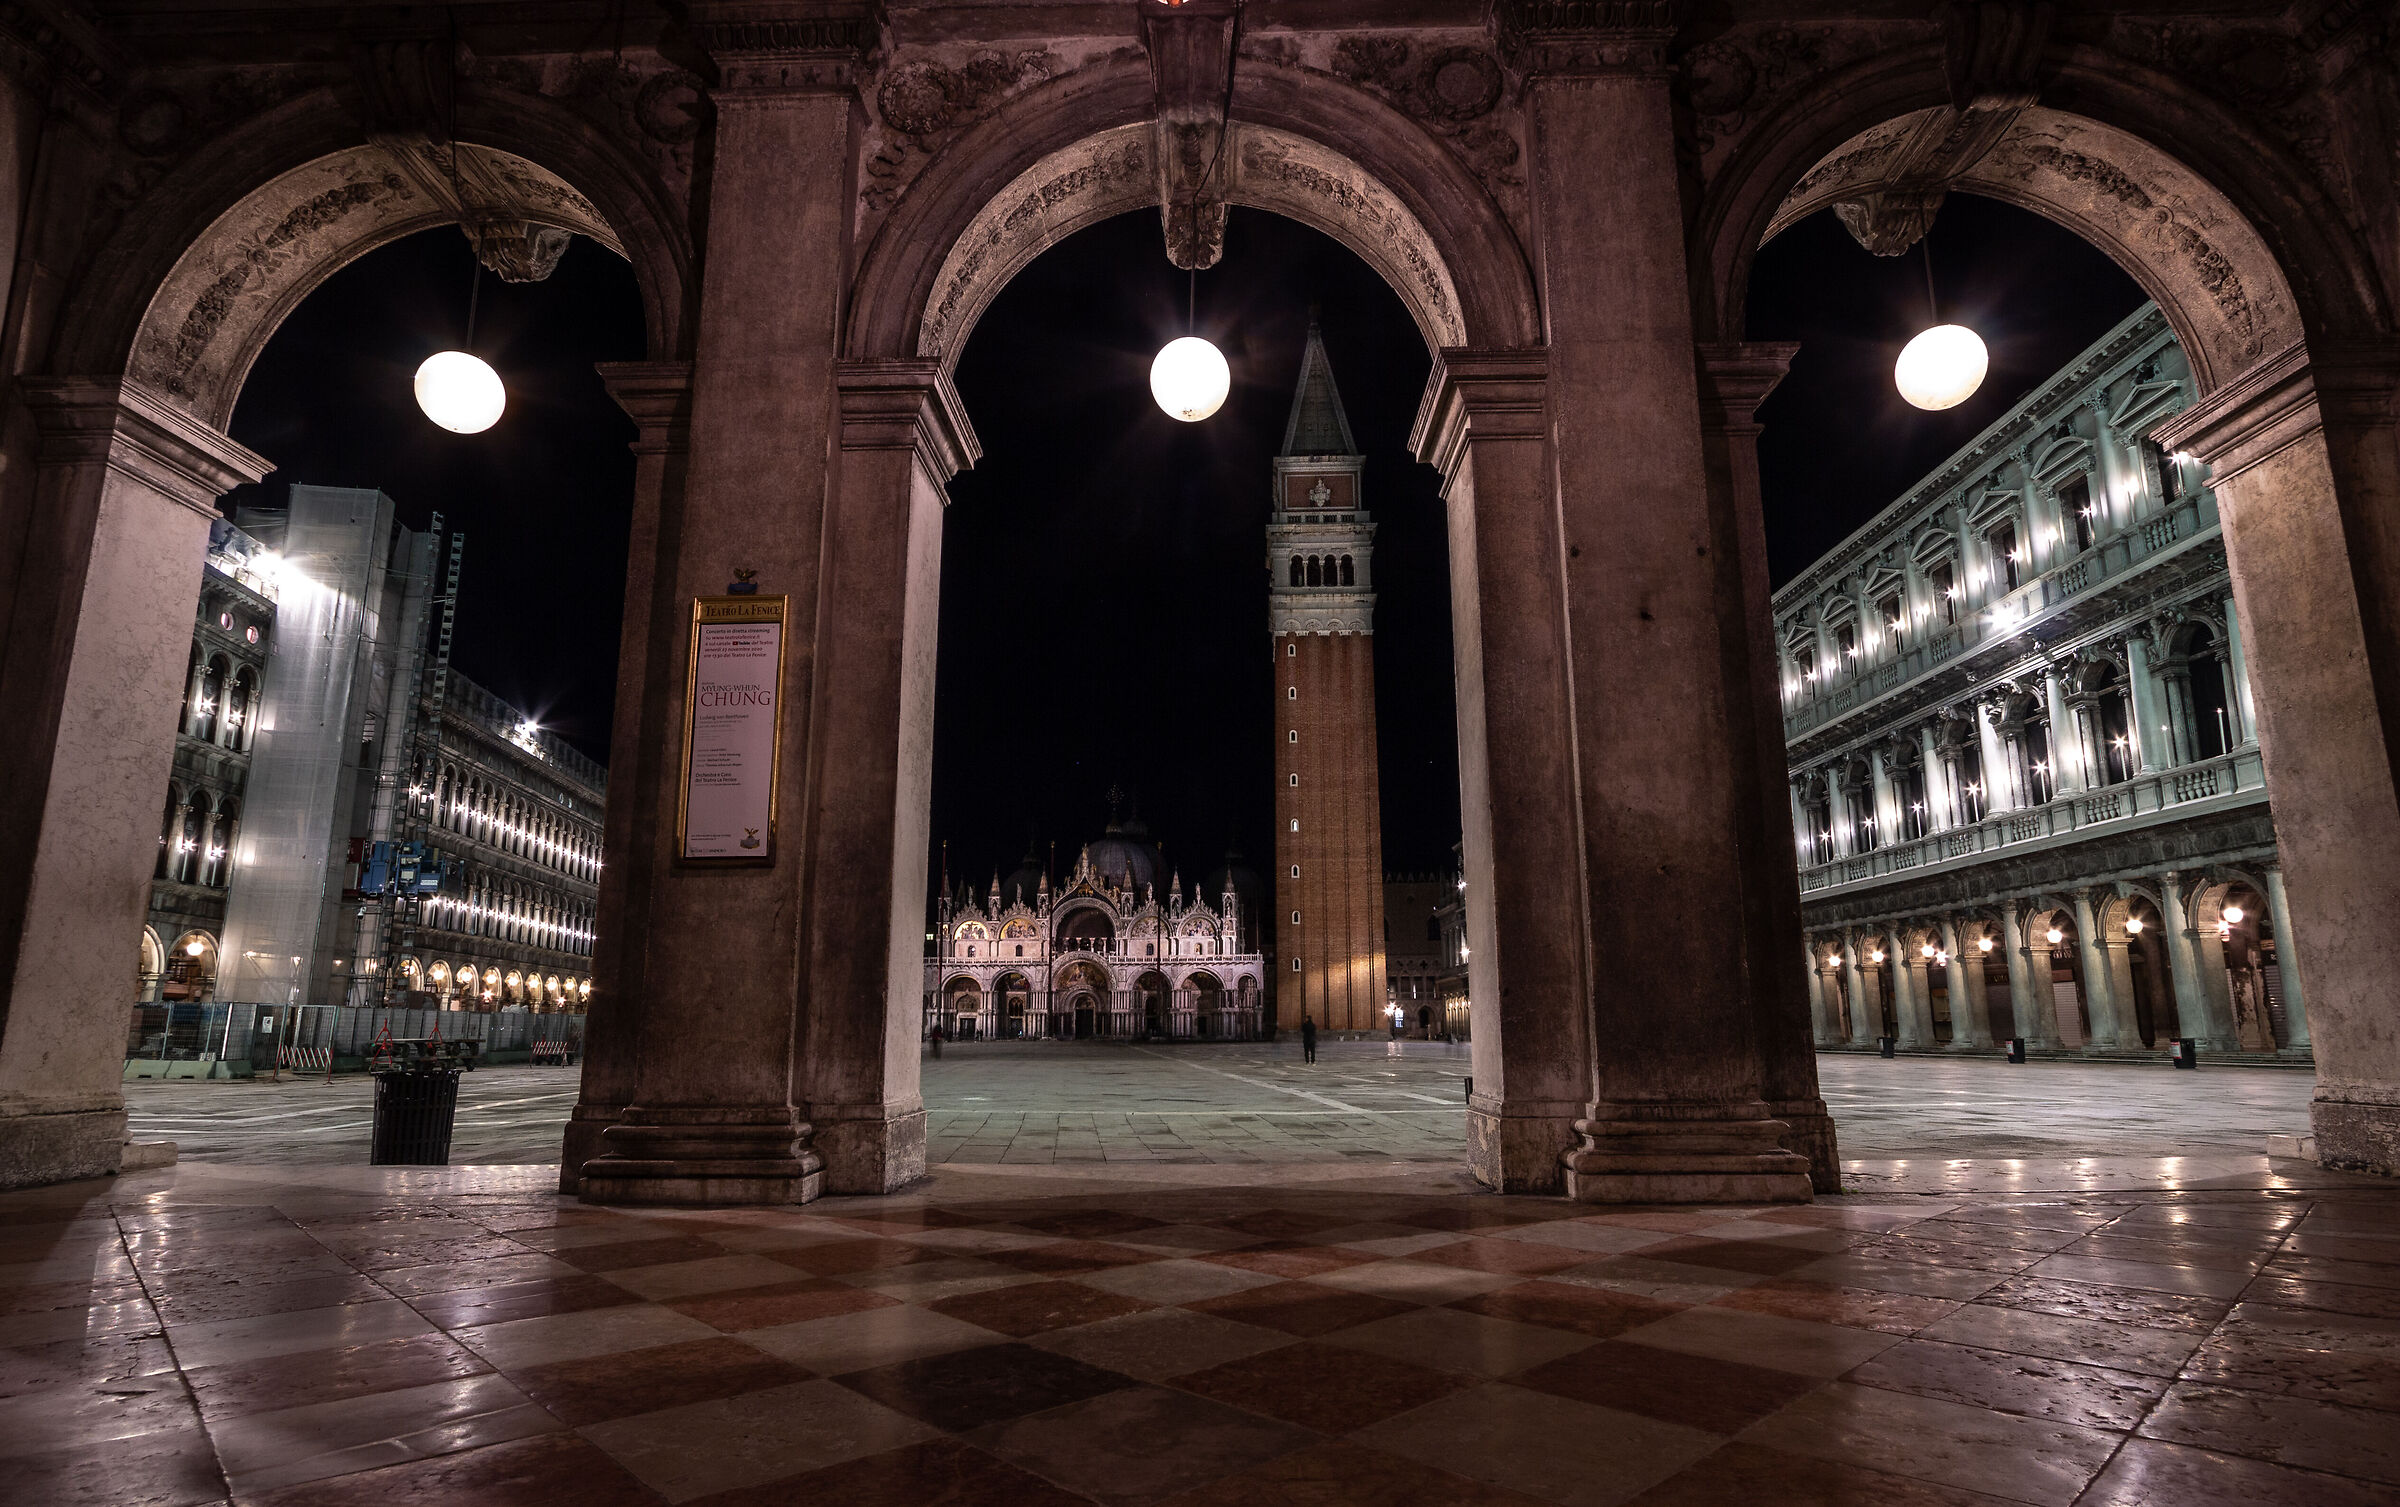 St. Mark's Square by night...